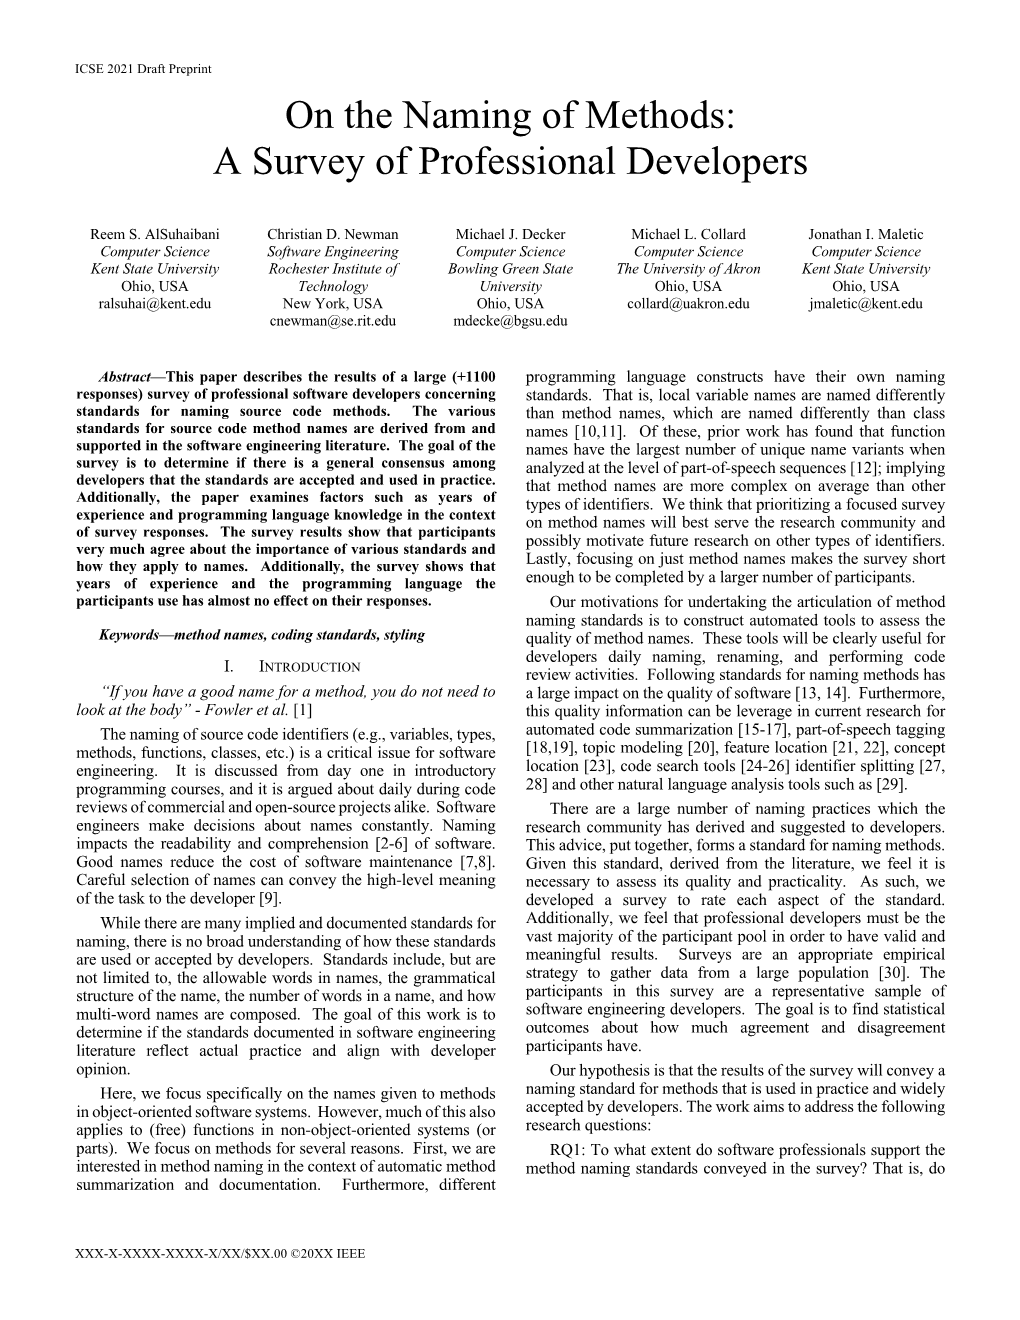 On the Naming of Methods: a Survey of Professional Developers